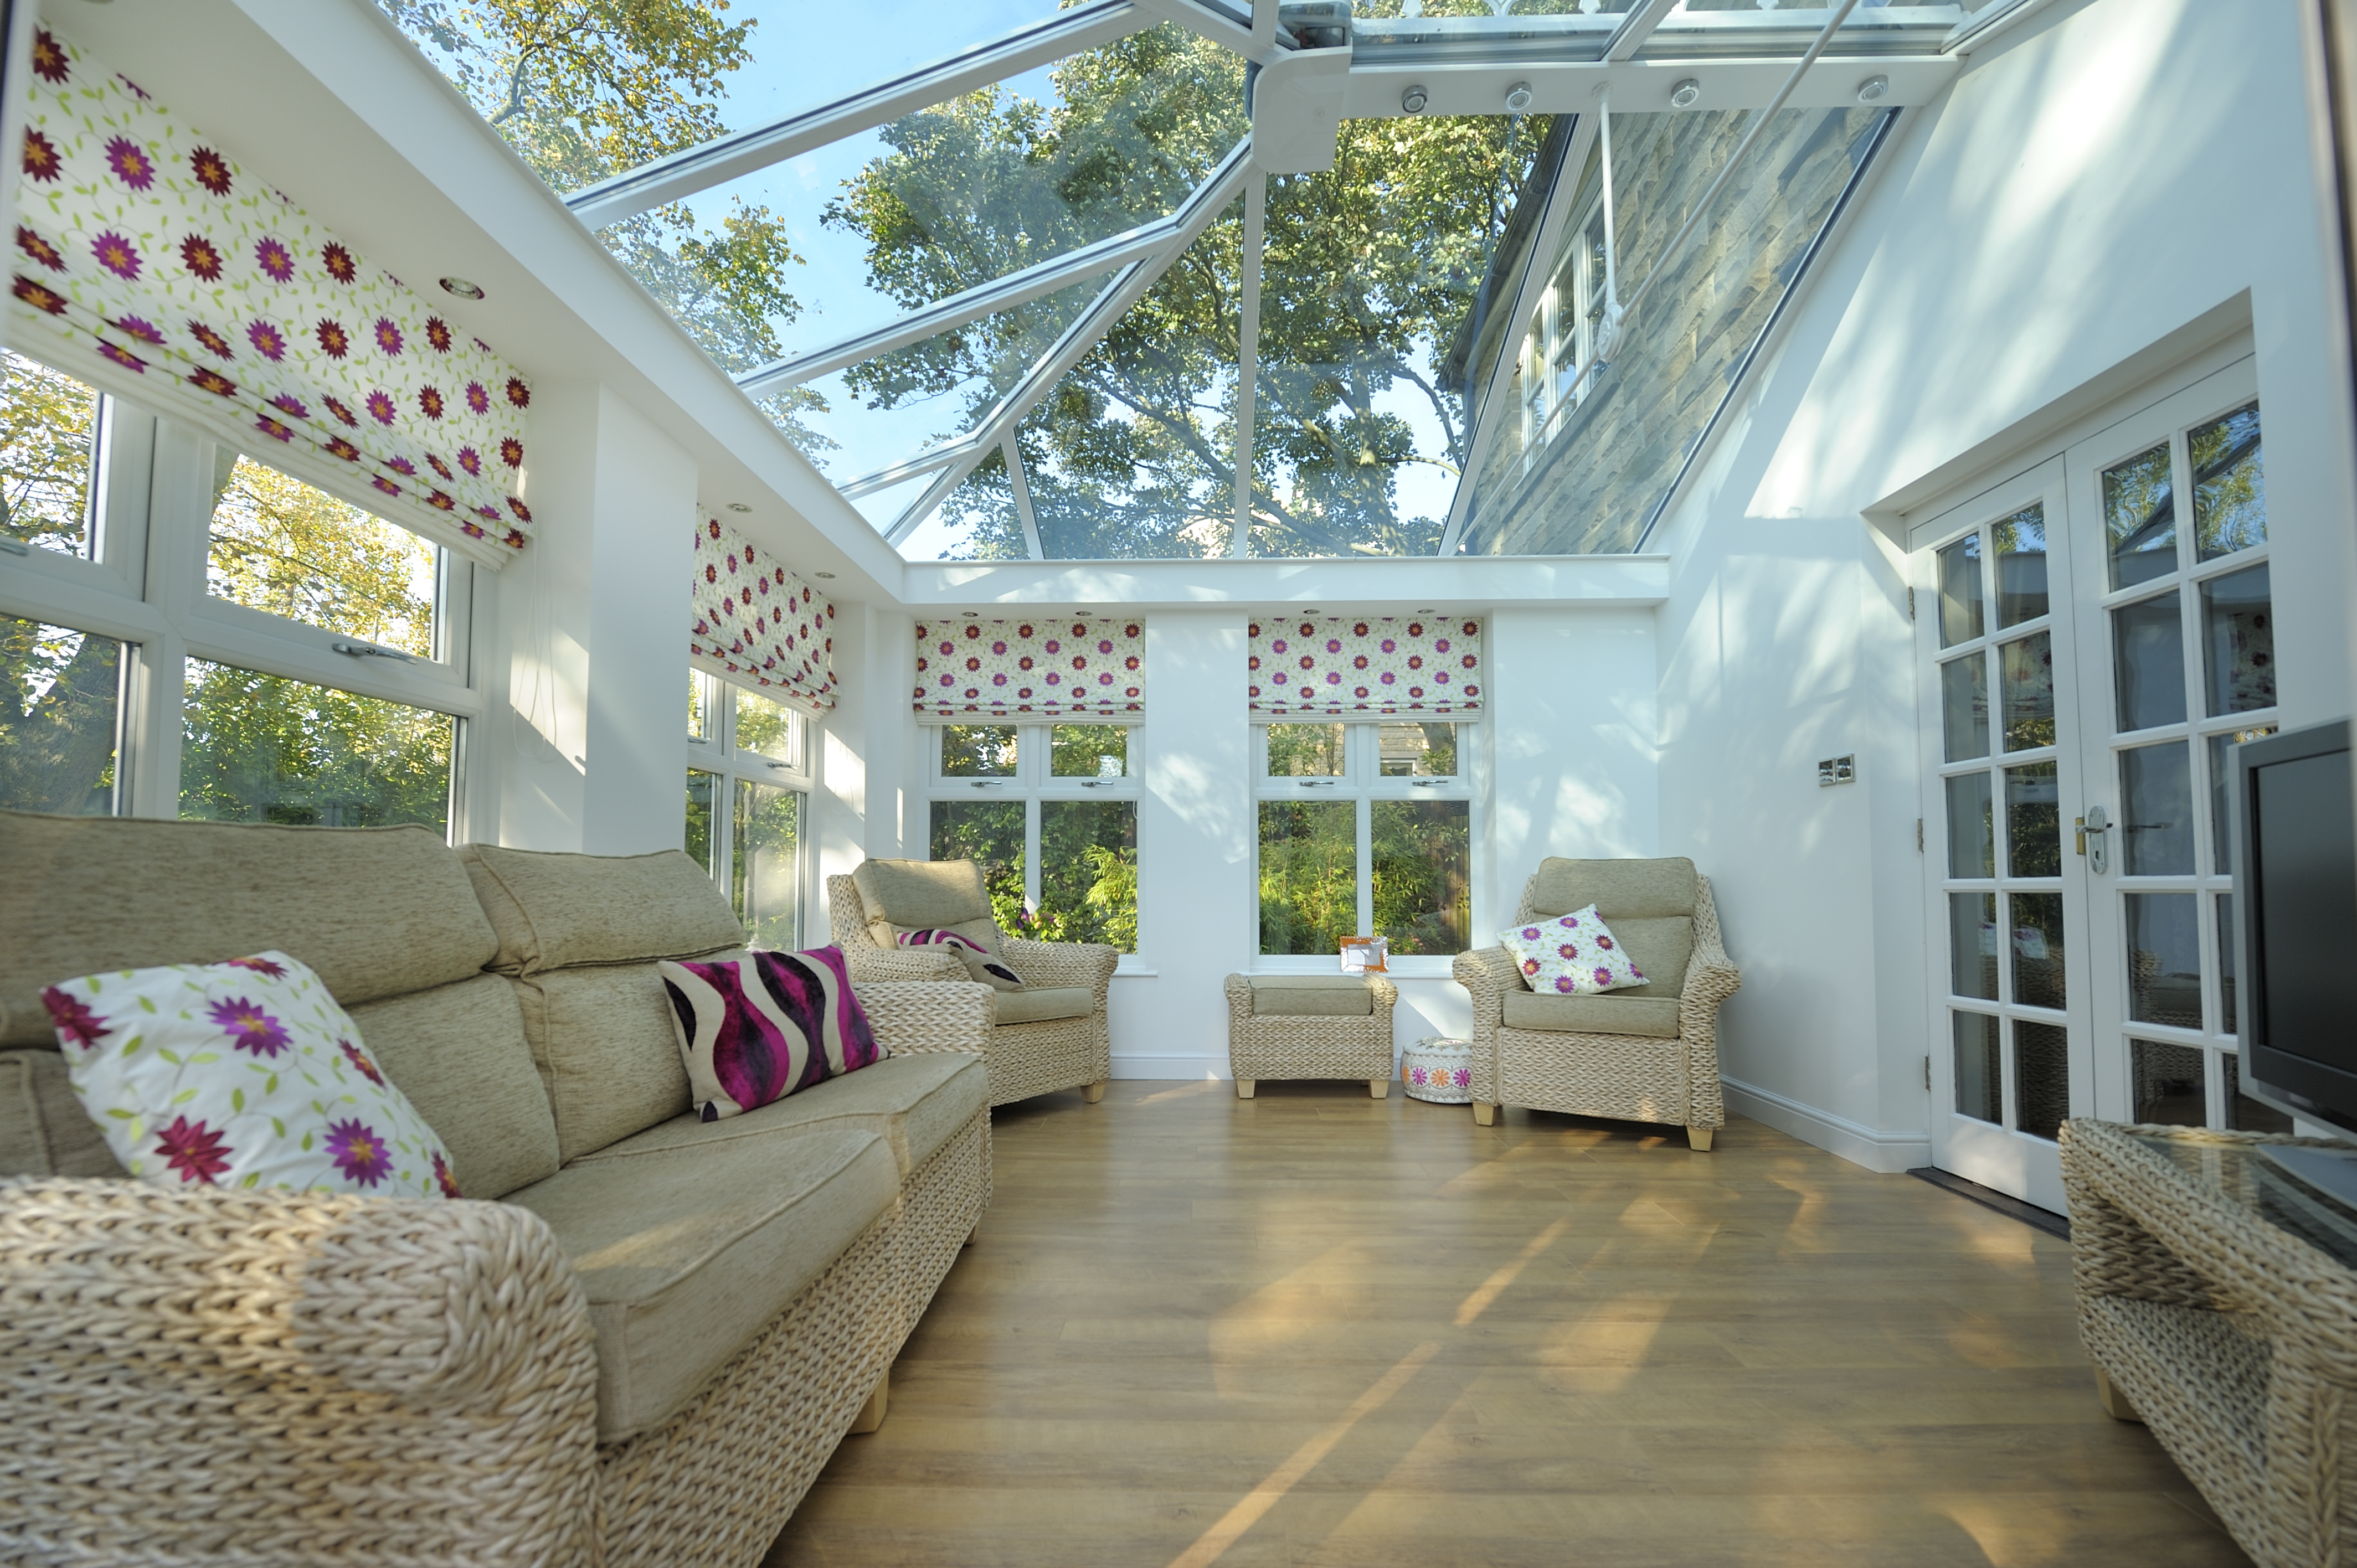 Inside a white conservatory with a glass roof.